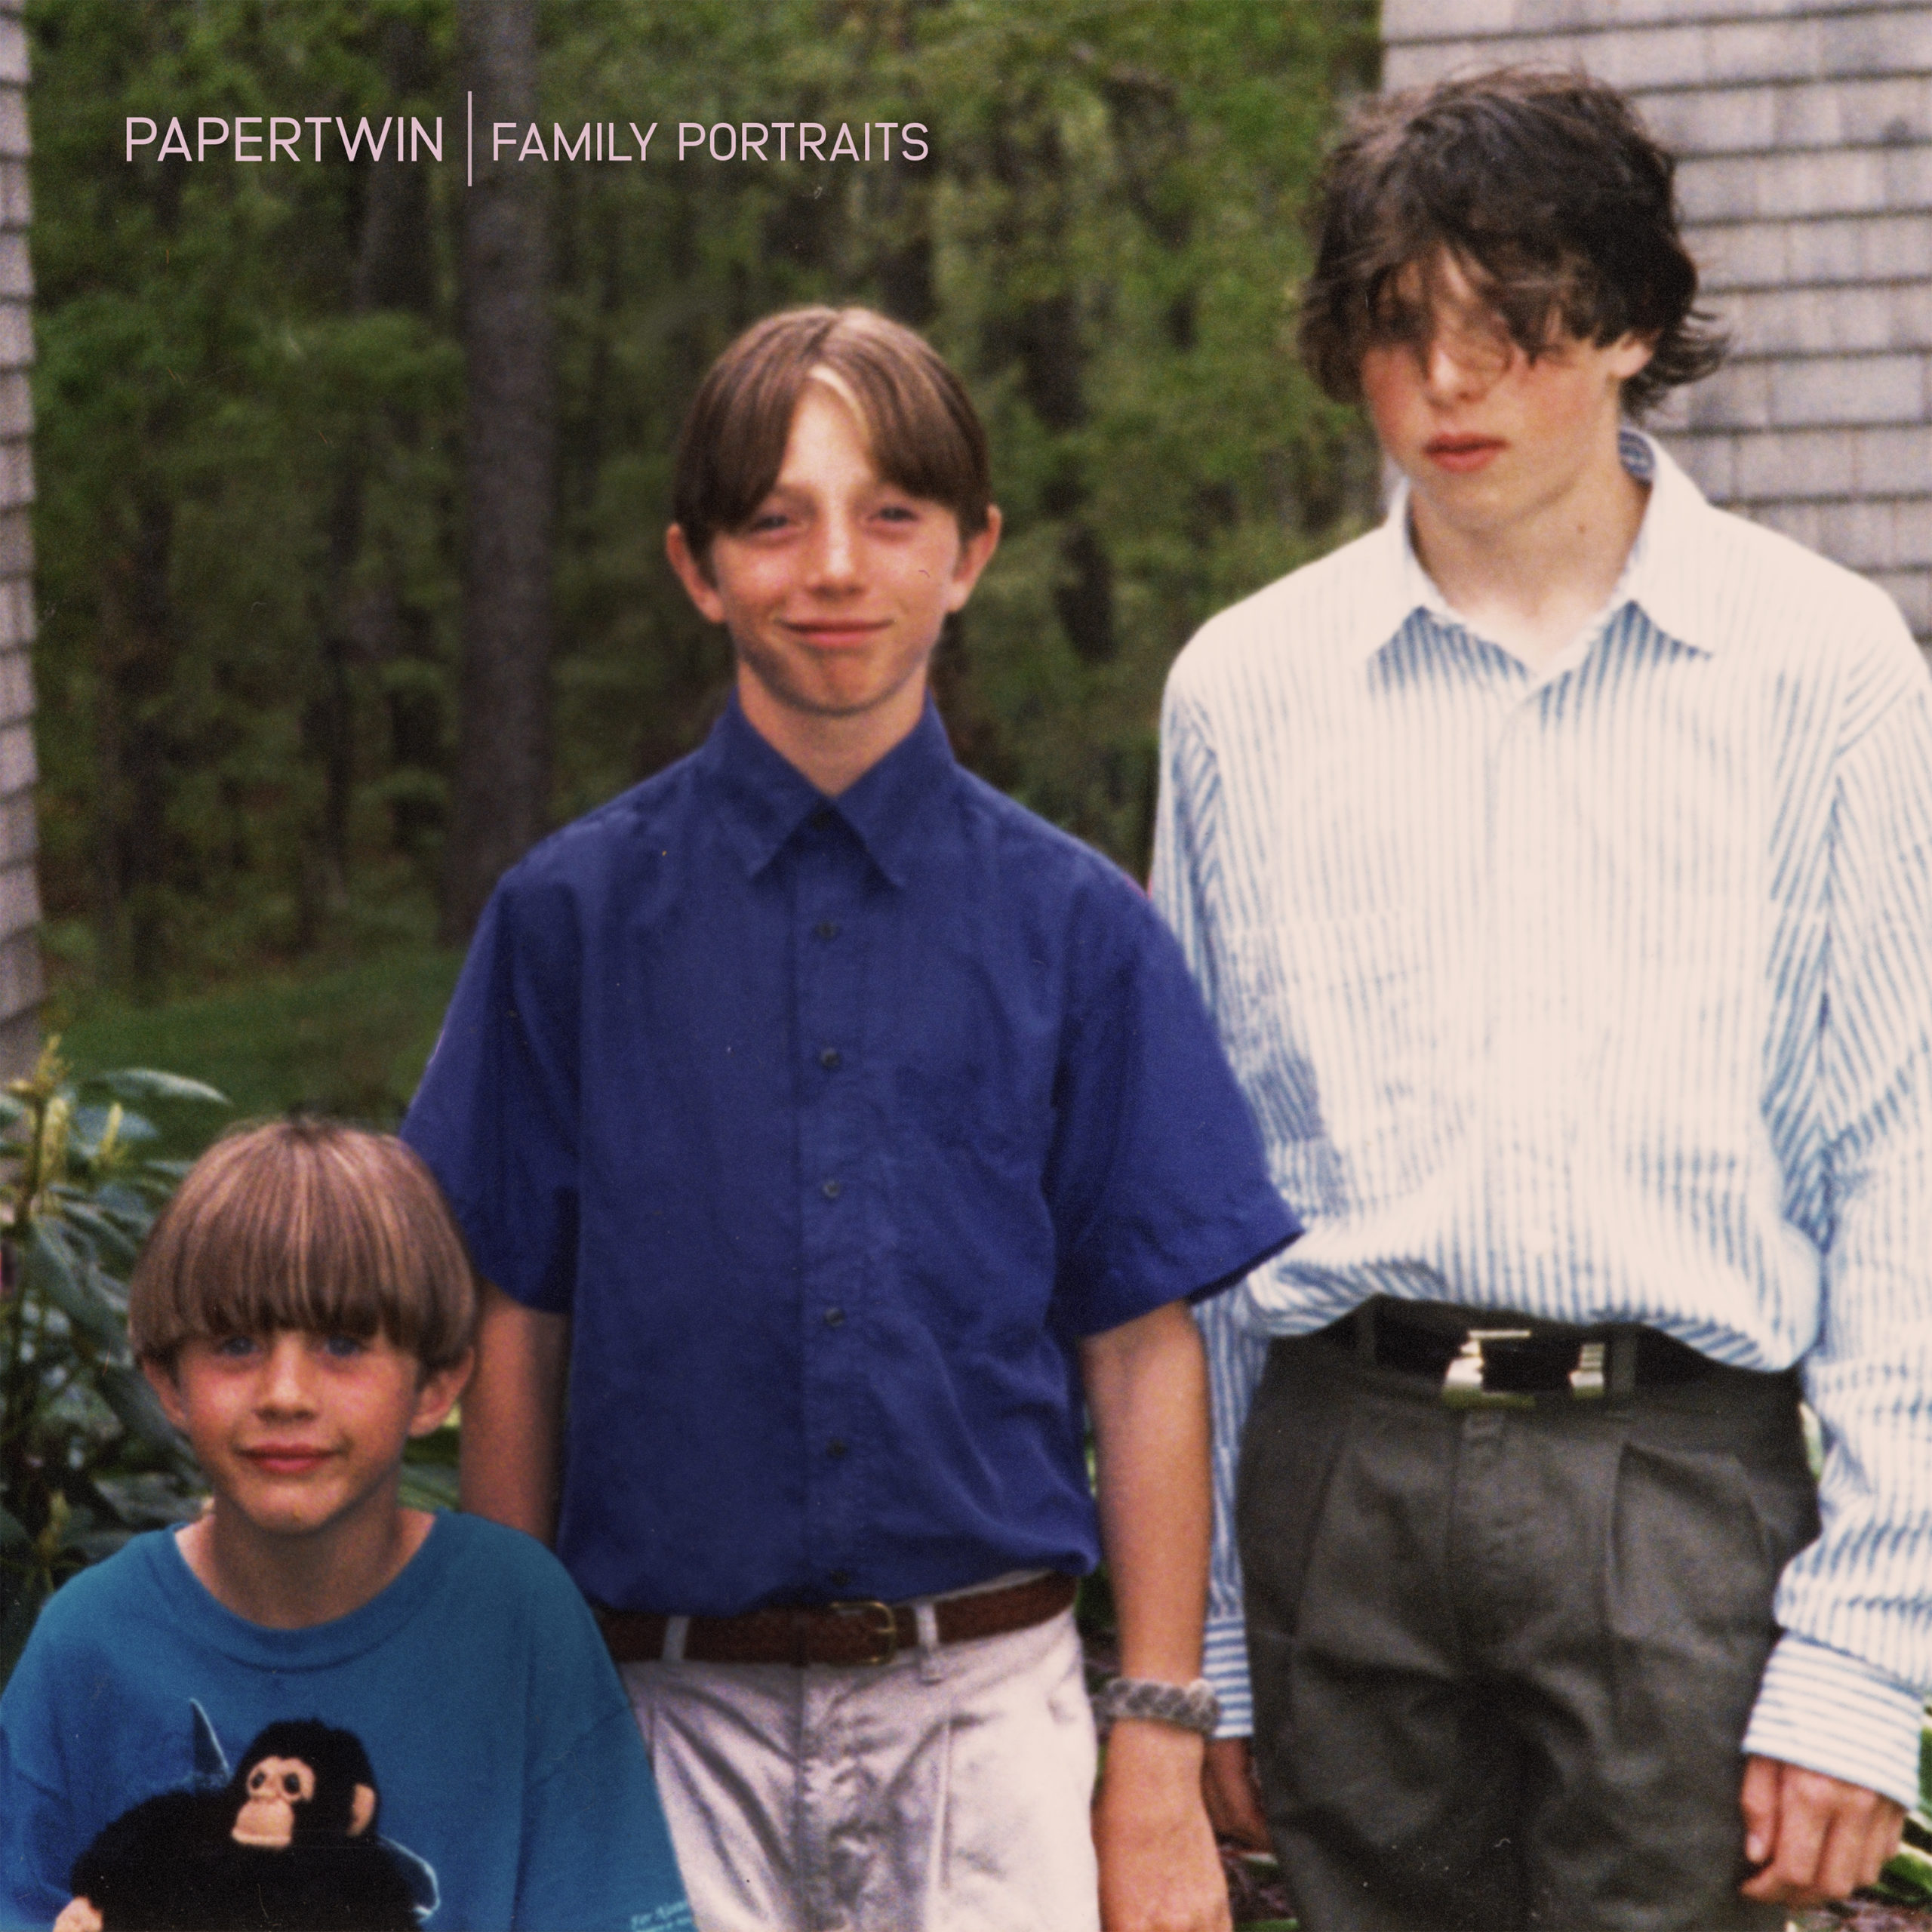 Papertwin’s debut album, Family Portraits, is out now via Druyan Records